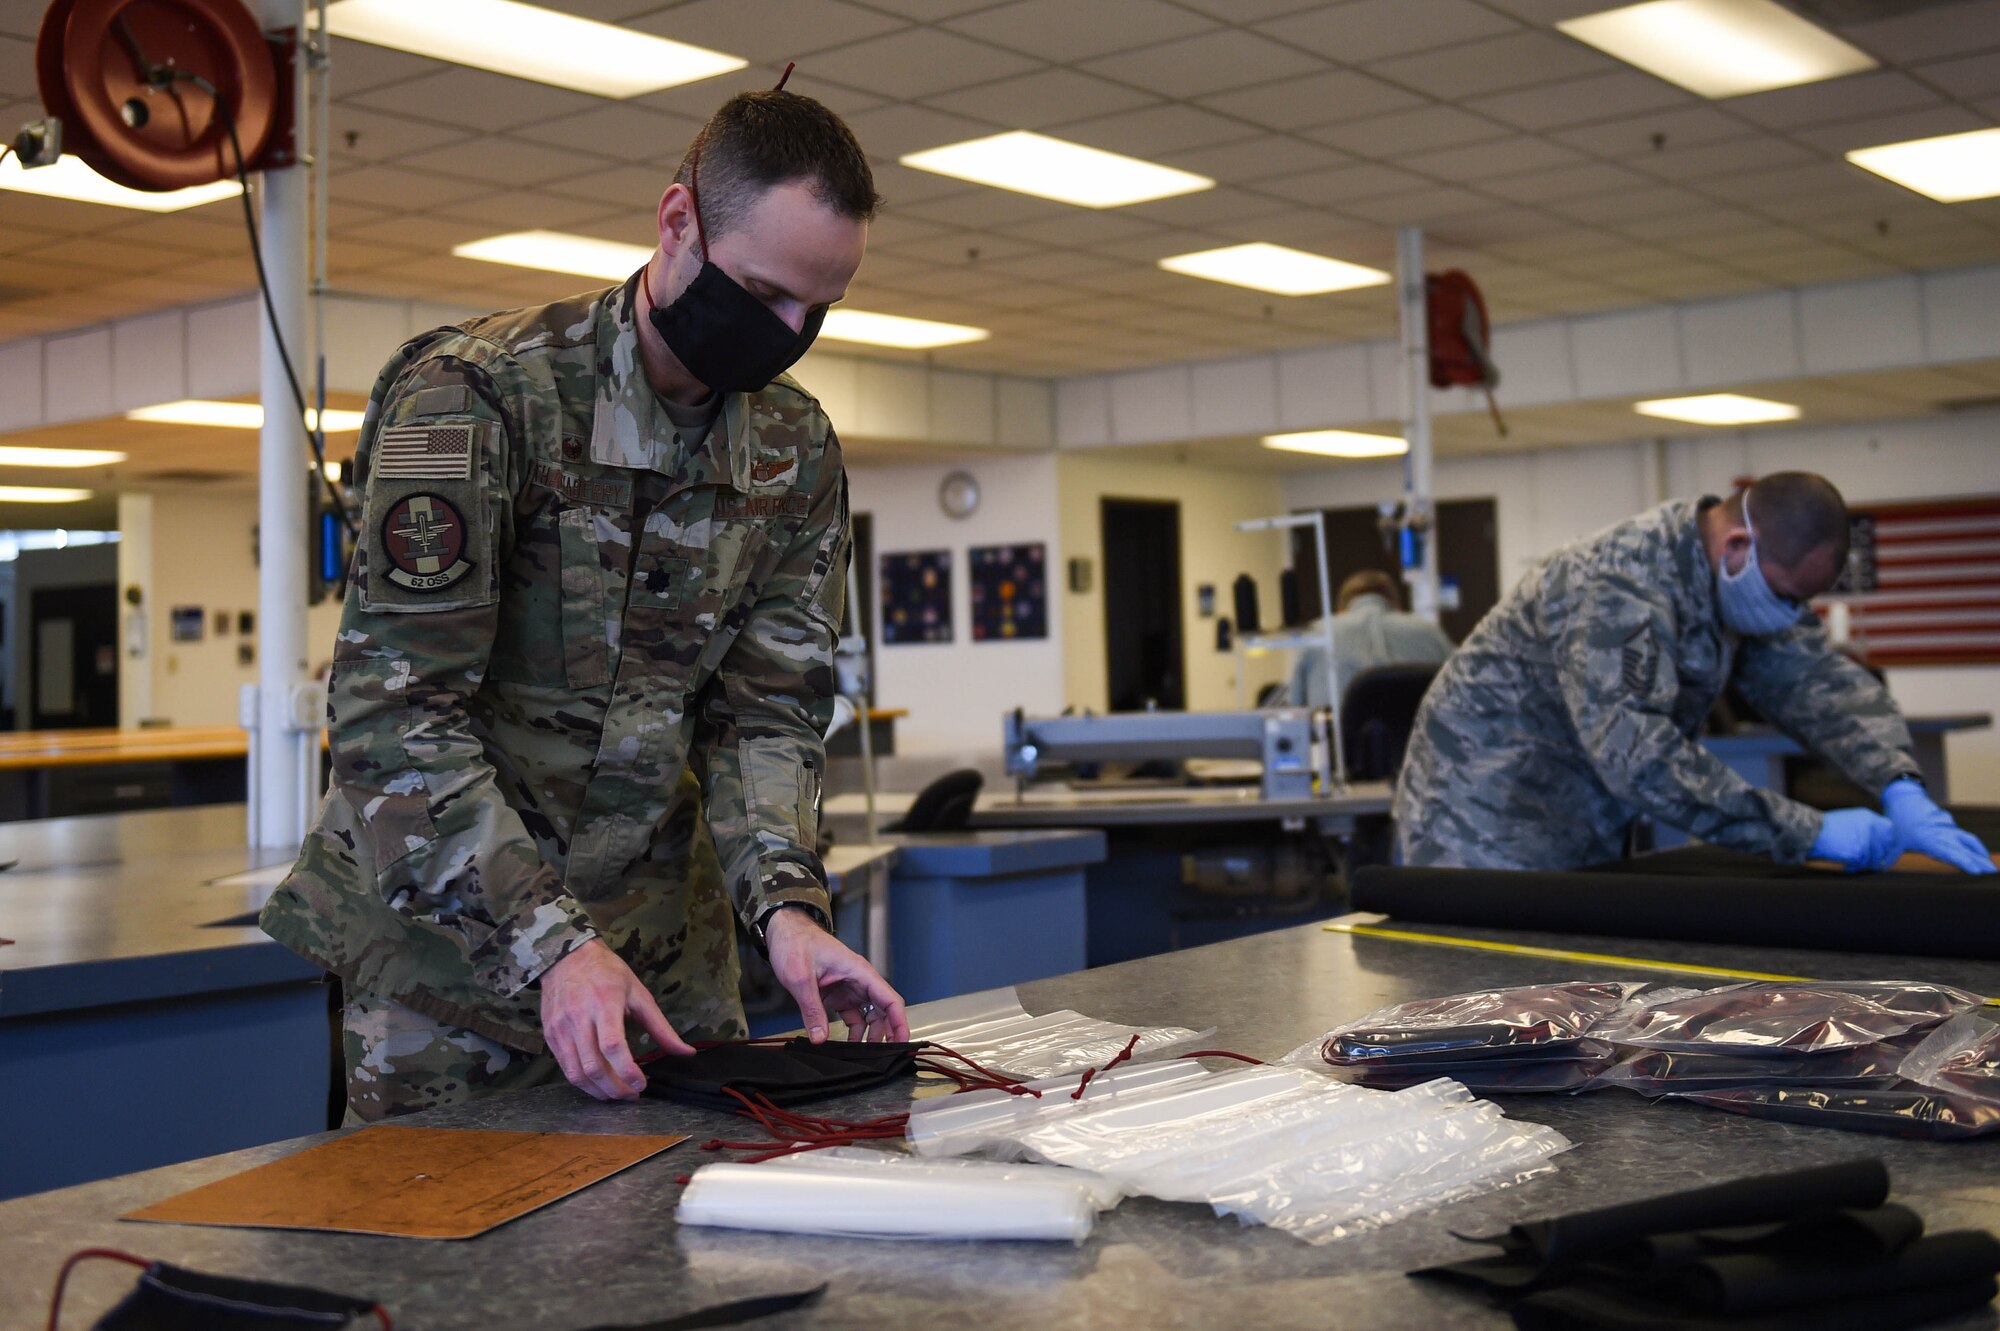 Lt. Col. Chris Thackaberry, 62nd Operations Support Squadron commander, packages completed cloth face masks at the 62nd OSS aircrew flight equipment fabrication shop on Joint Base Lewis-McChord, Wash., April 6, 2020. The masks were distributed first to Airmen who come in contact with aircrews most frequently such as maintainers and AFE Airmen. (U.S. Air Force photo by Airman 1st Class Mikayla Heineck)